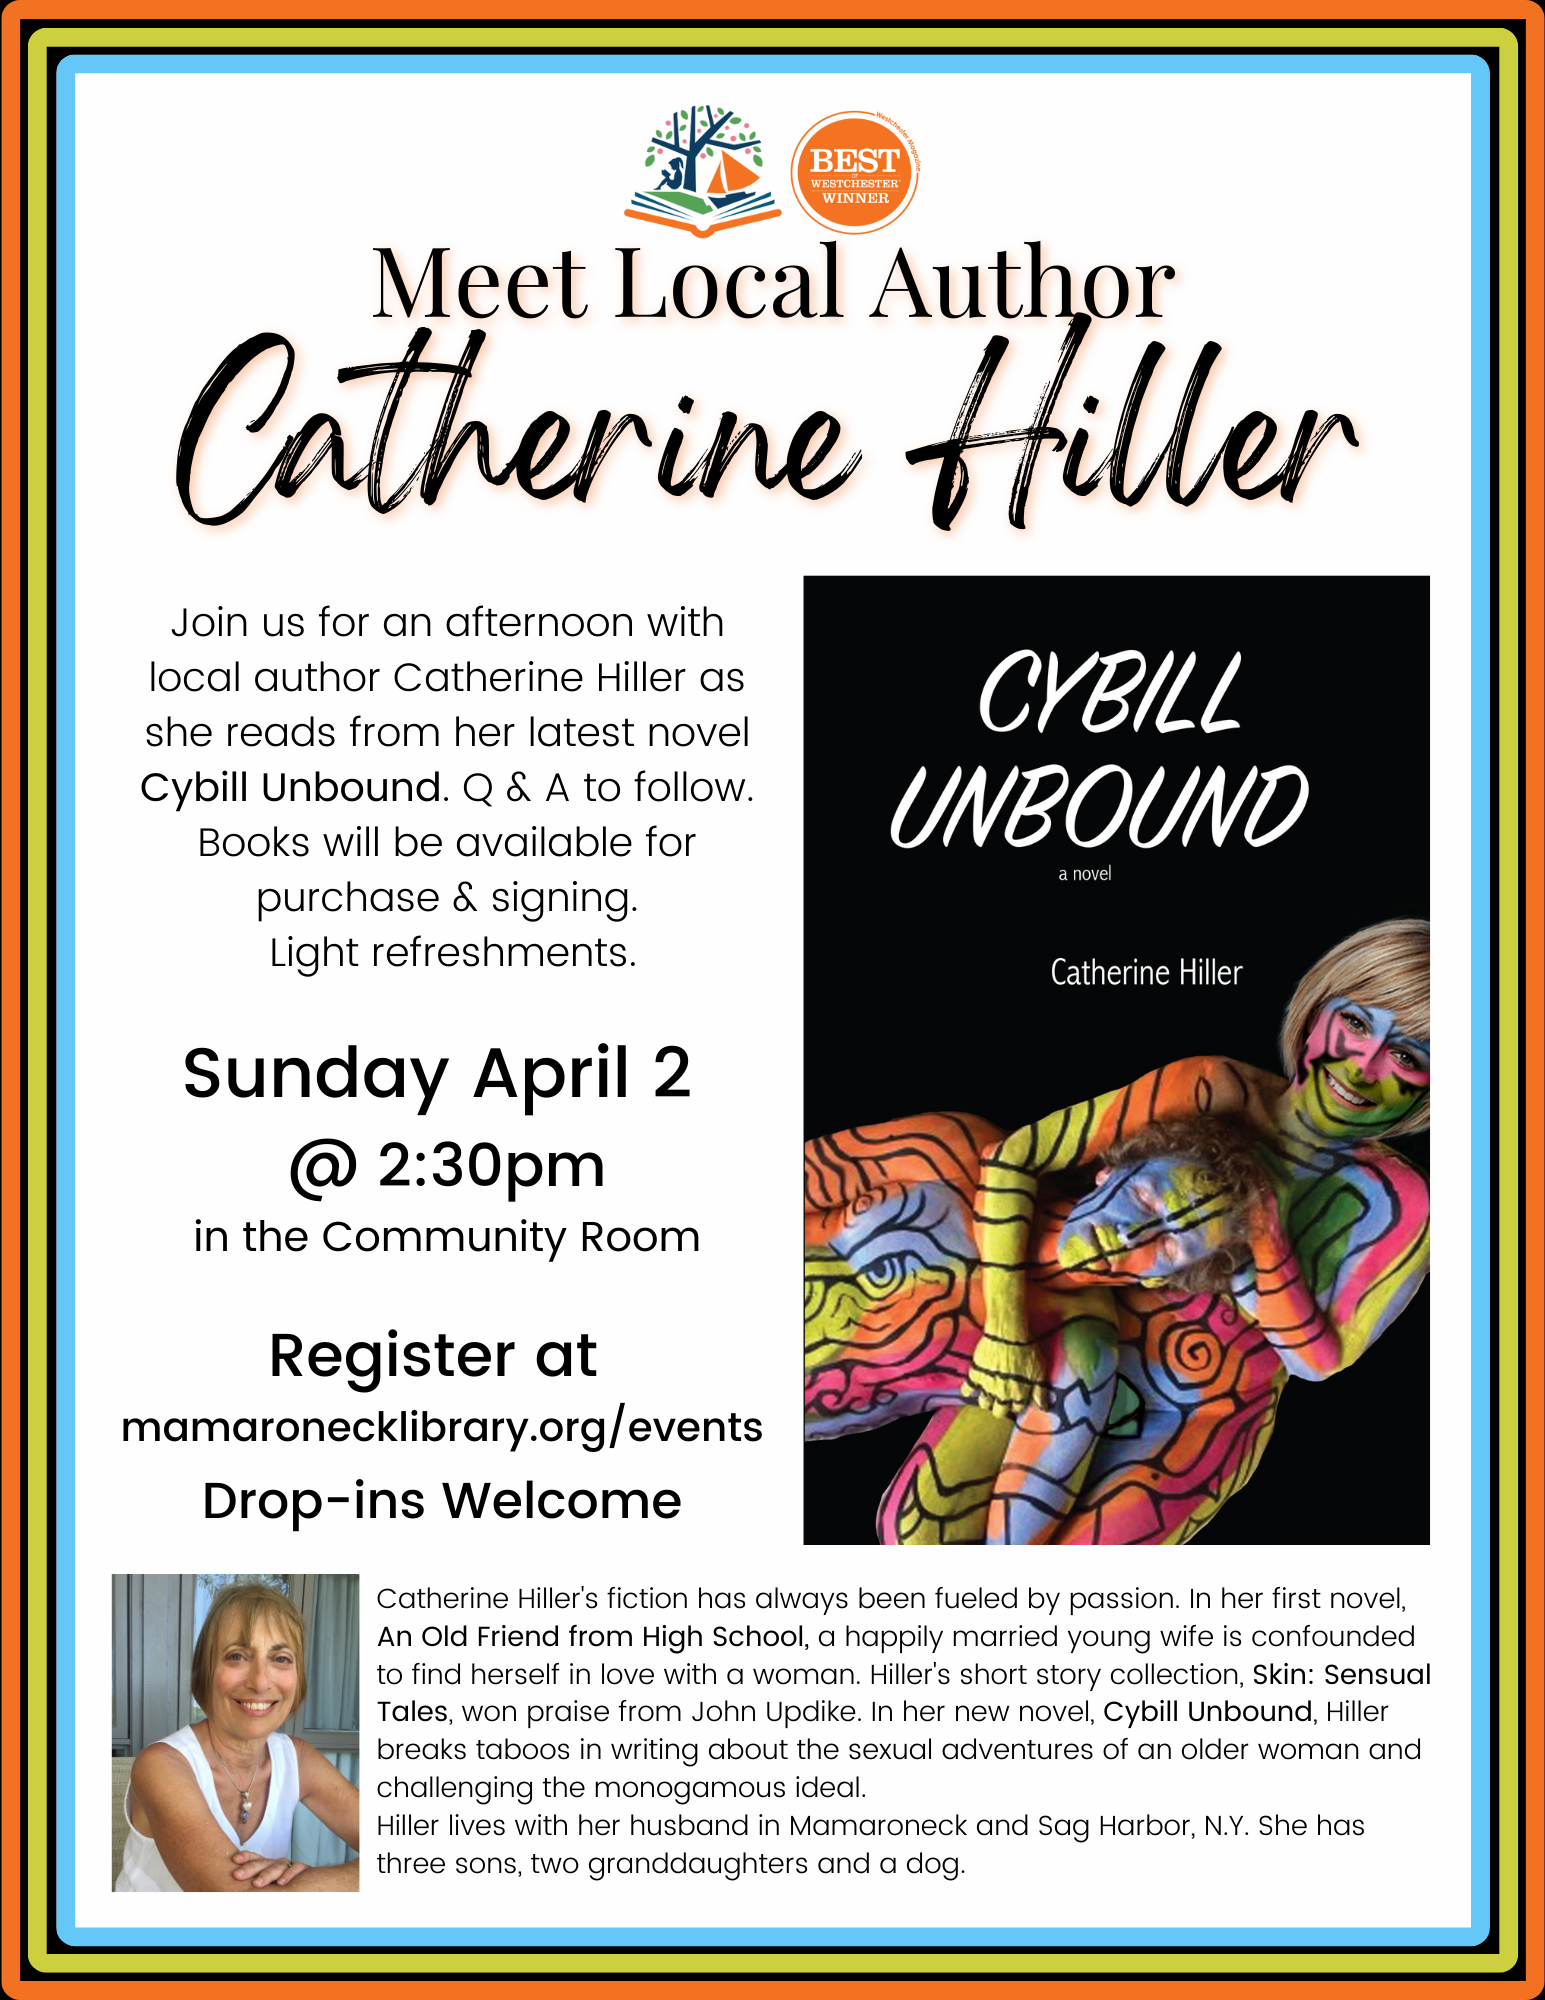 4/2 @ 2:30pm - Meet local author Catherine Hiller in the Community Room